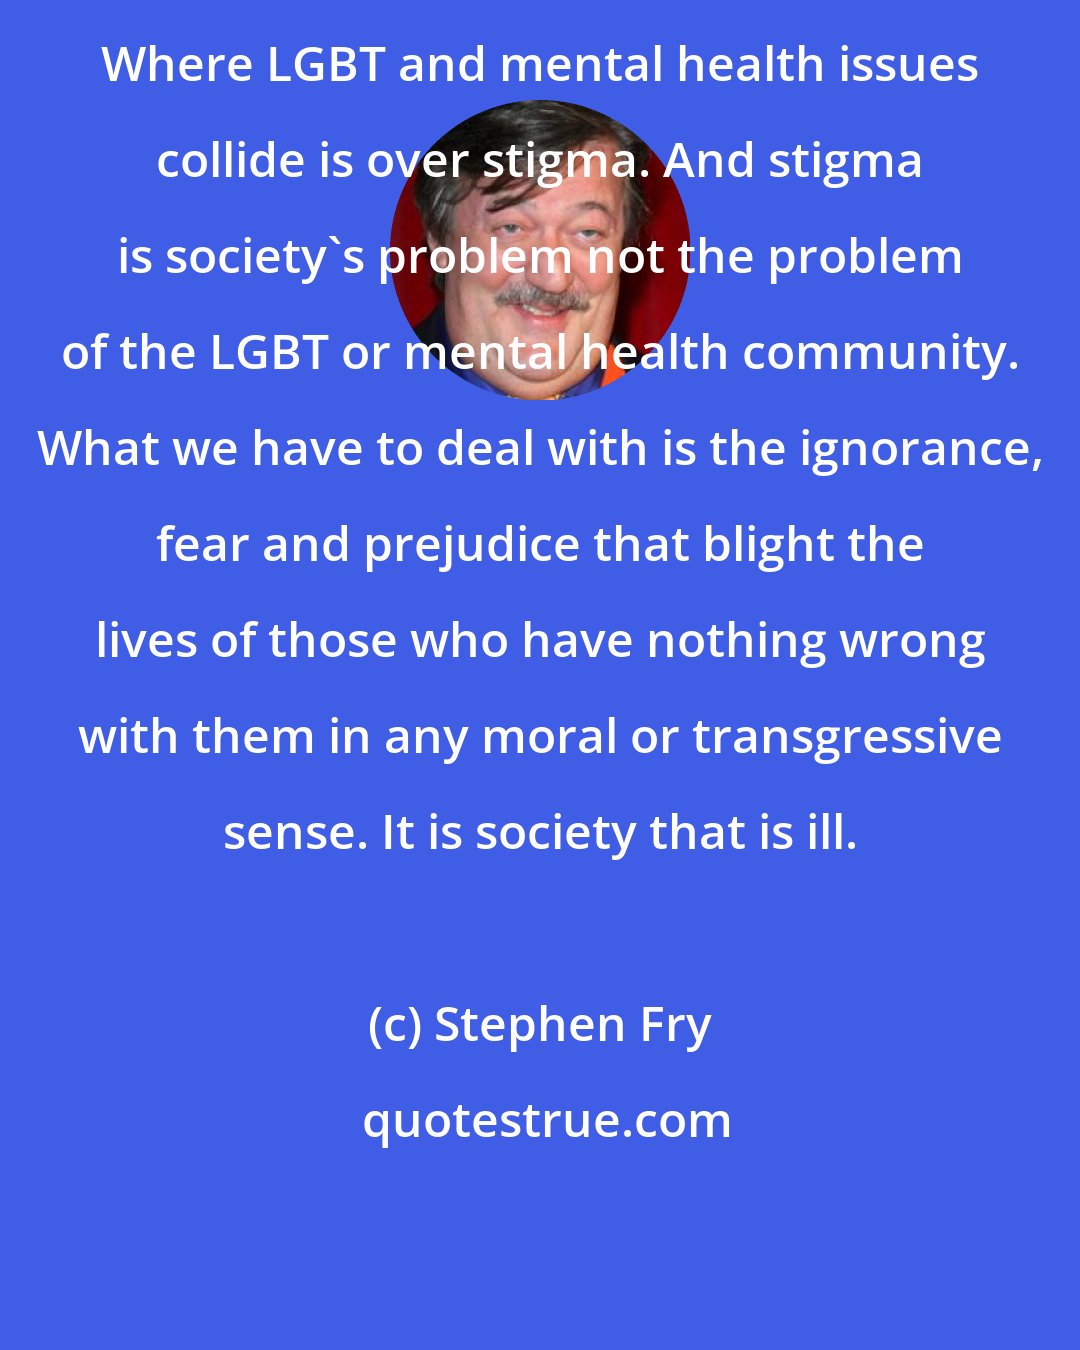 Stephen Fry: Where LGBT and mental health issues collide is over stigma. And stigma is society's problem not the problem of the LGBT or mental health community. What we have to deal with is the ignorance, fear and prejudice that blight the lives of those who have nothing wrong with them in any moral or transgressive sense. It is society that is ill.